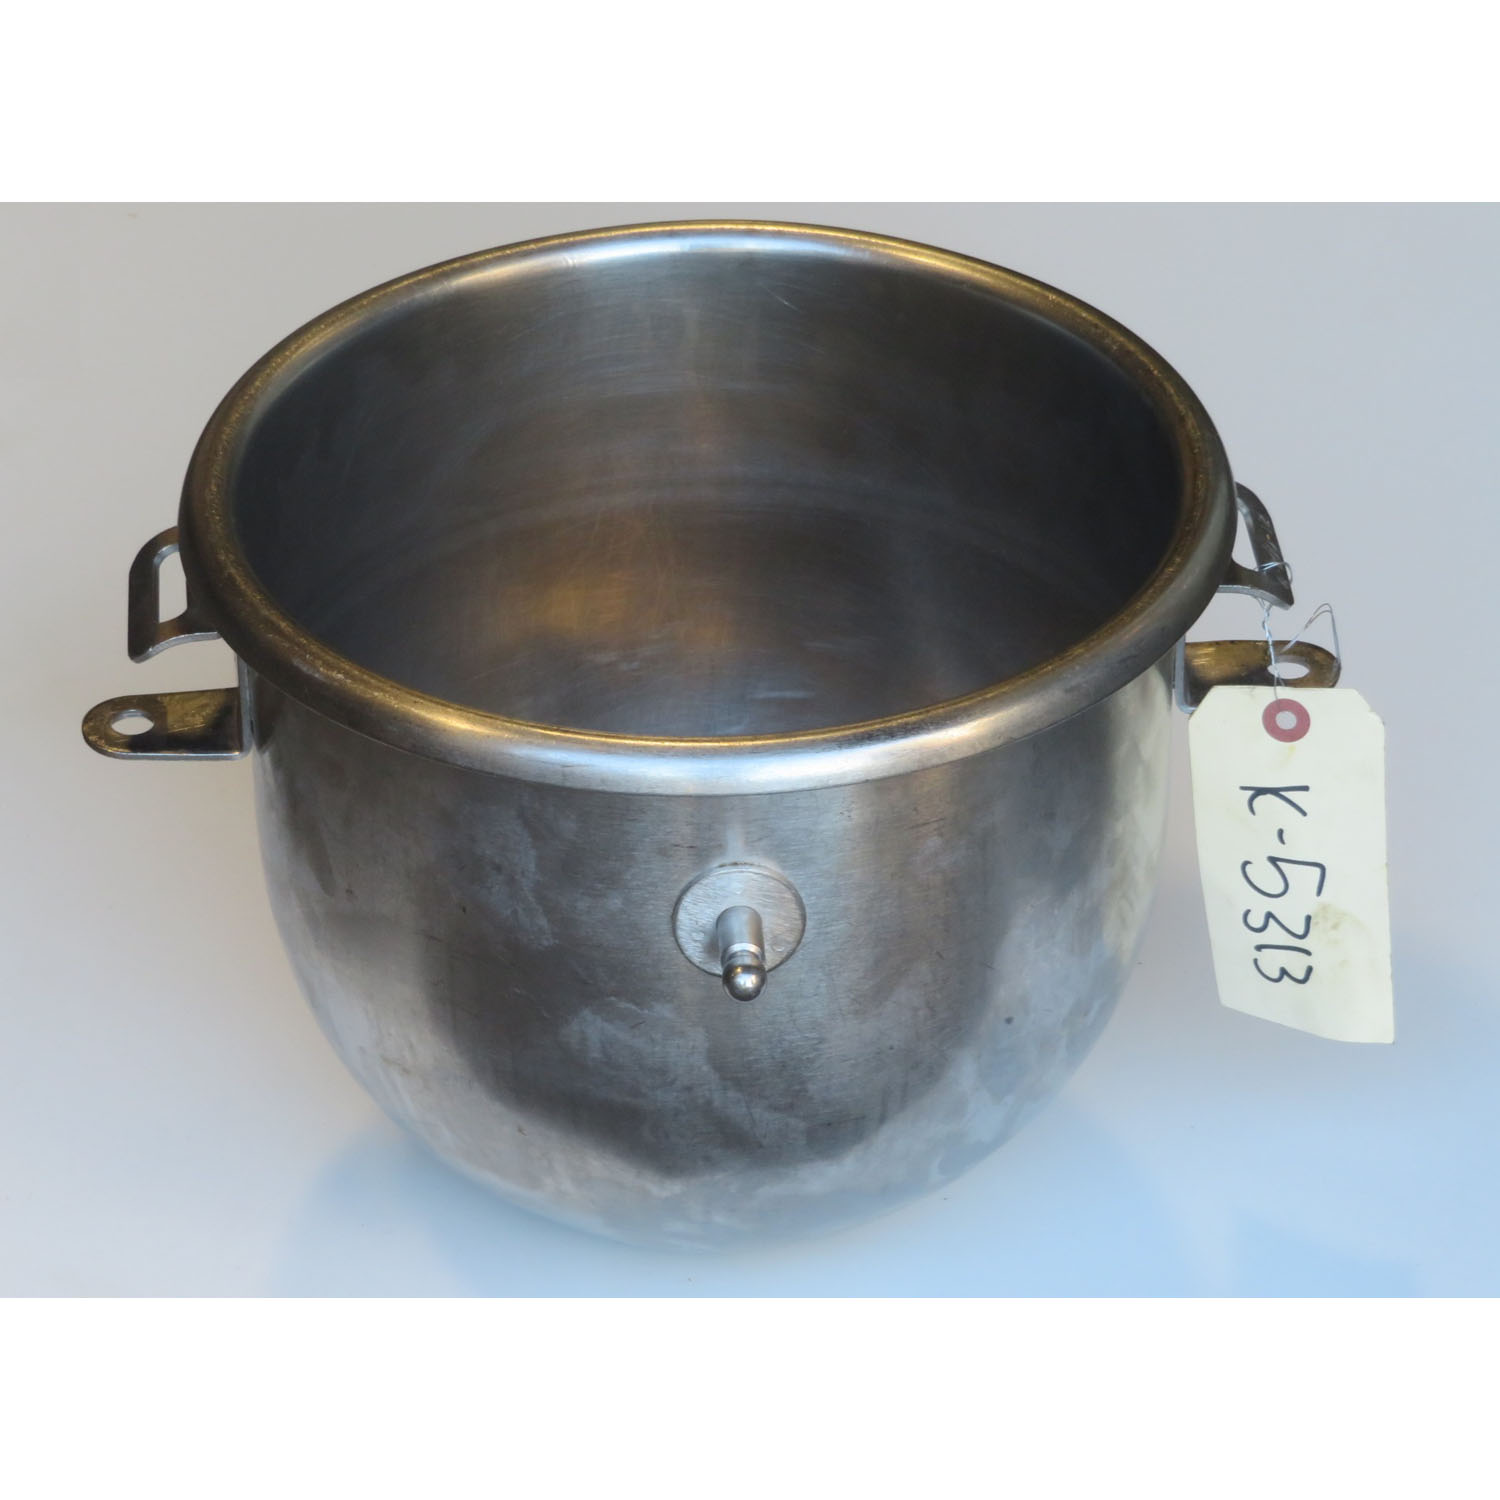 Hobart 00-295644 12 Quart Bowl For A200 Mixer, Used Excellent Condition image 1